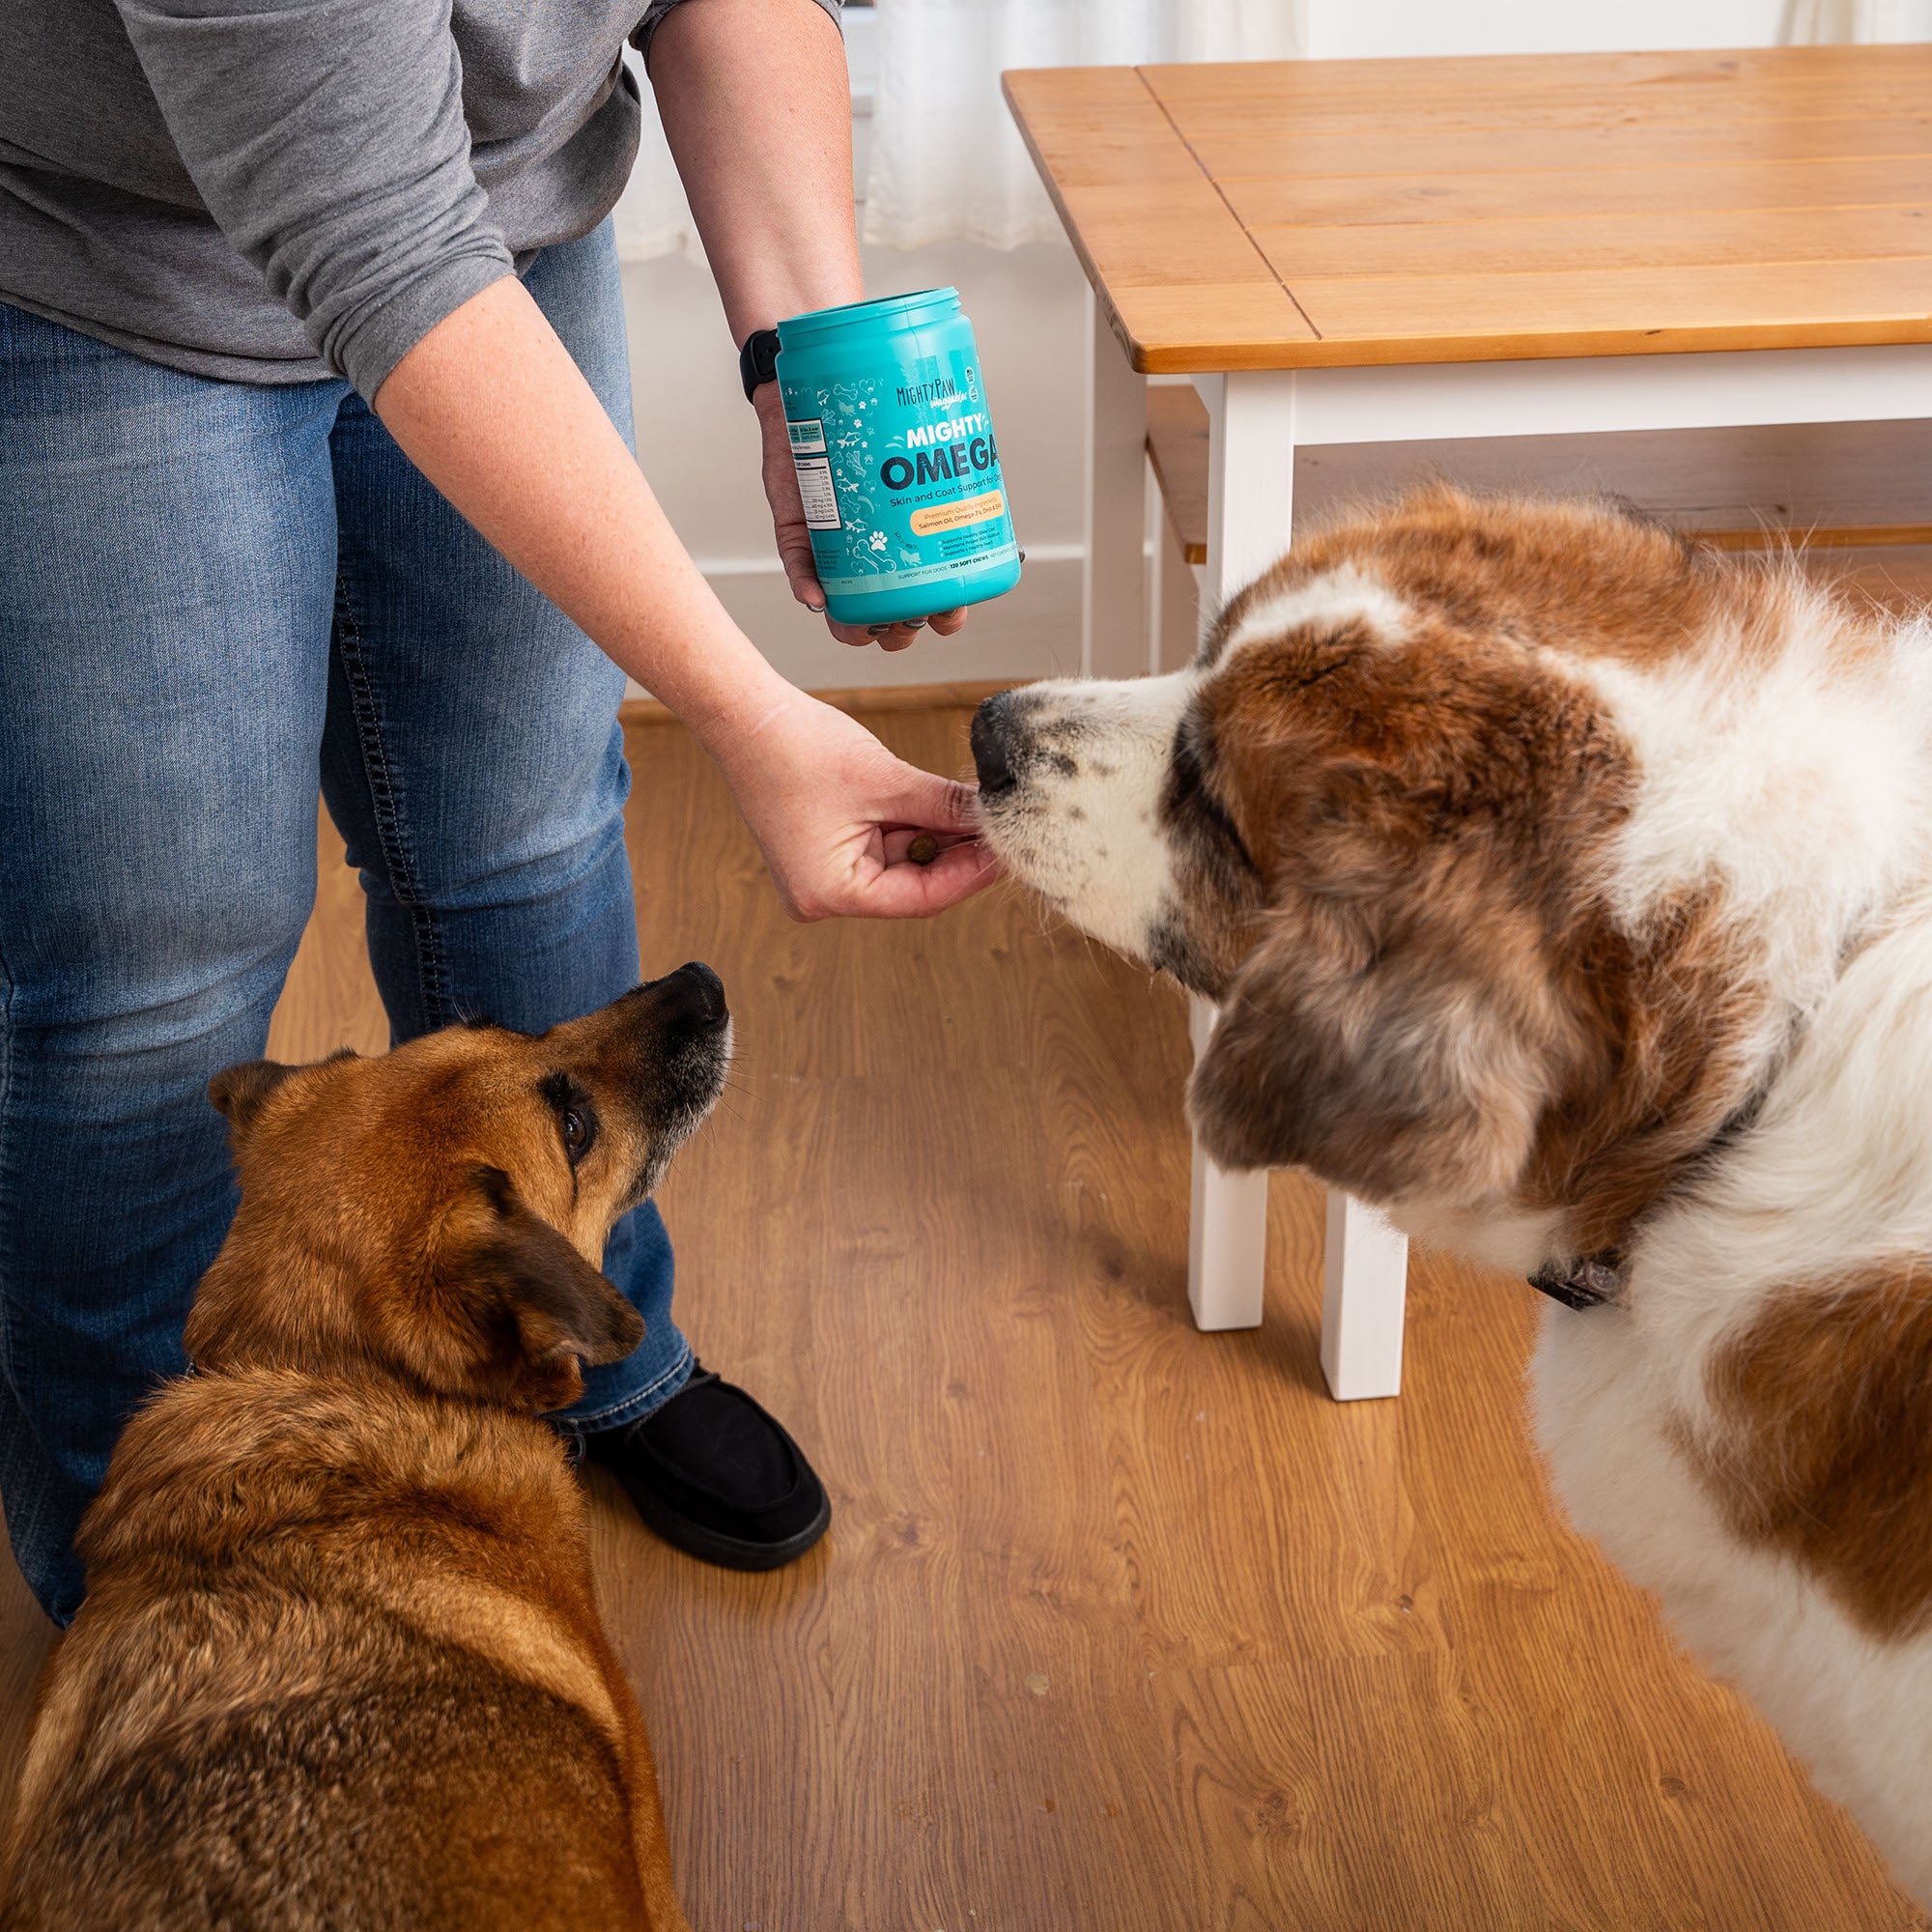 Dog owner gives two dogs Mighty Omega treat in kitchen.